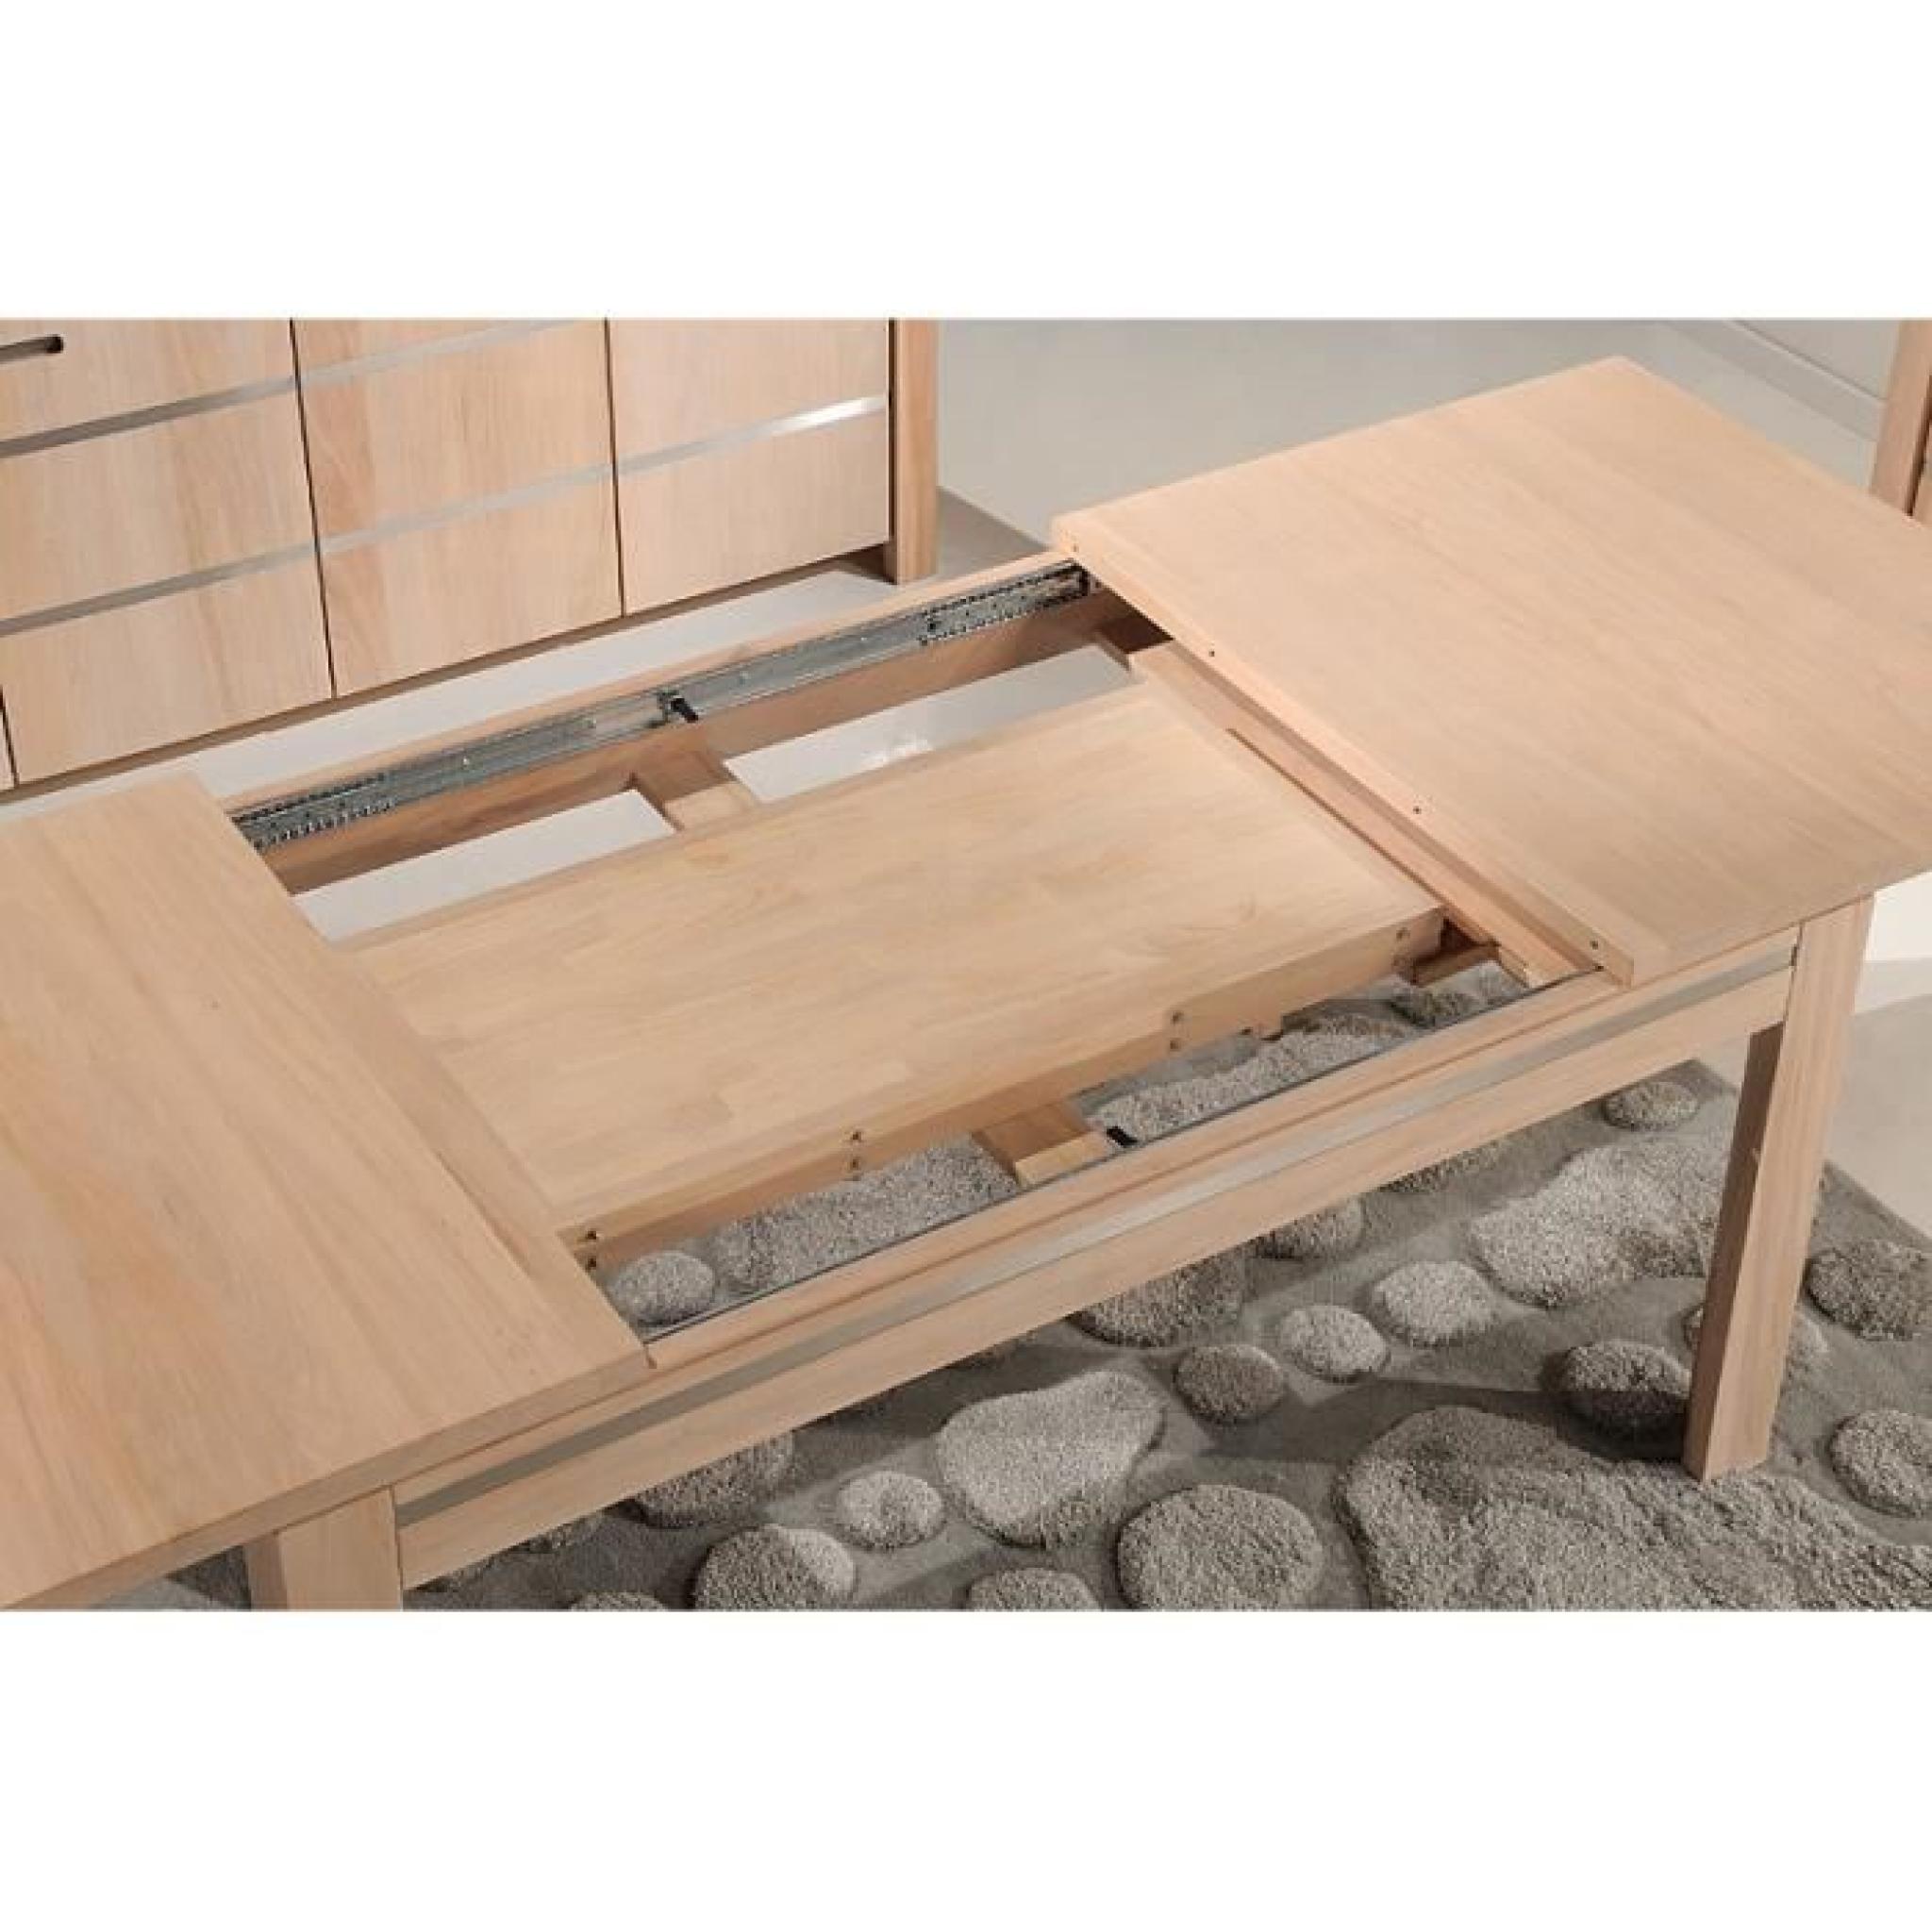 Table OPALE 160/95 ORME MASSIF-INOX (Orme) pas cher